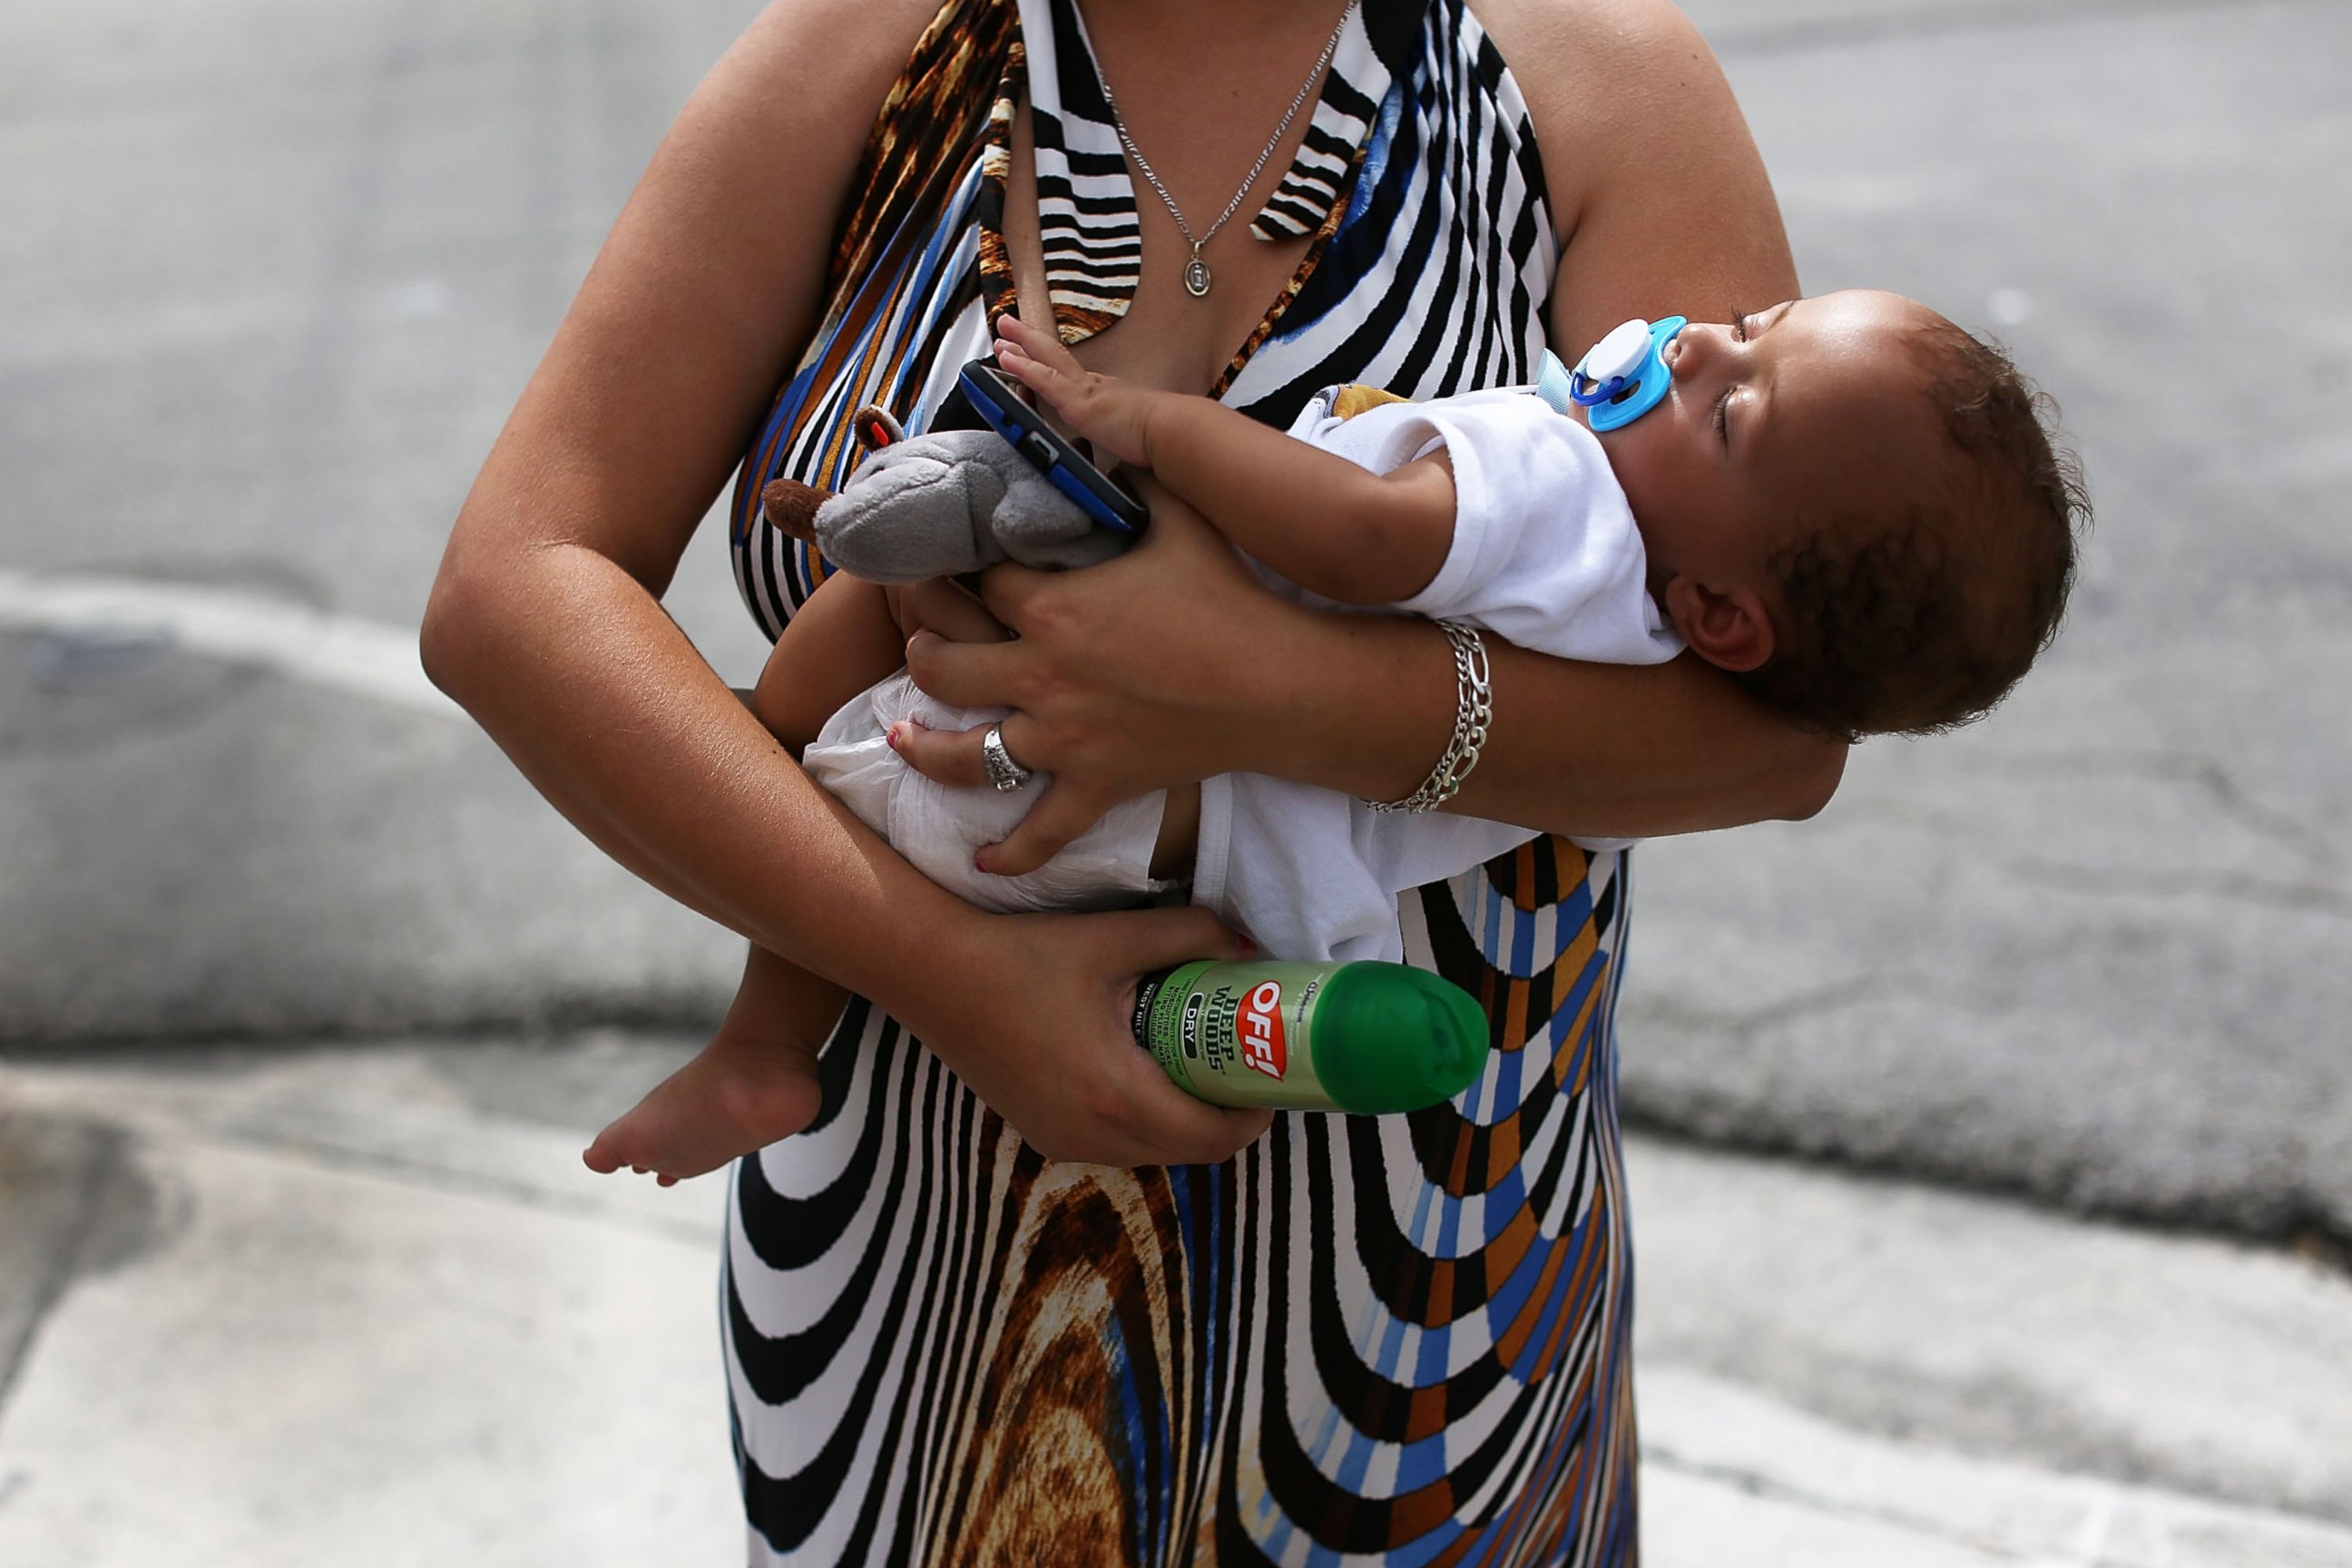 PHOTO: Barbara Betancourt holds her baby Daniel Valdes after being given a can of insect repellent by James Bernat, a City of Miami police officer